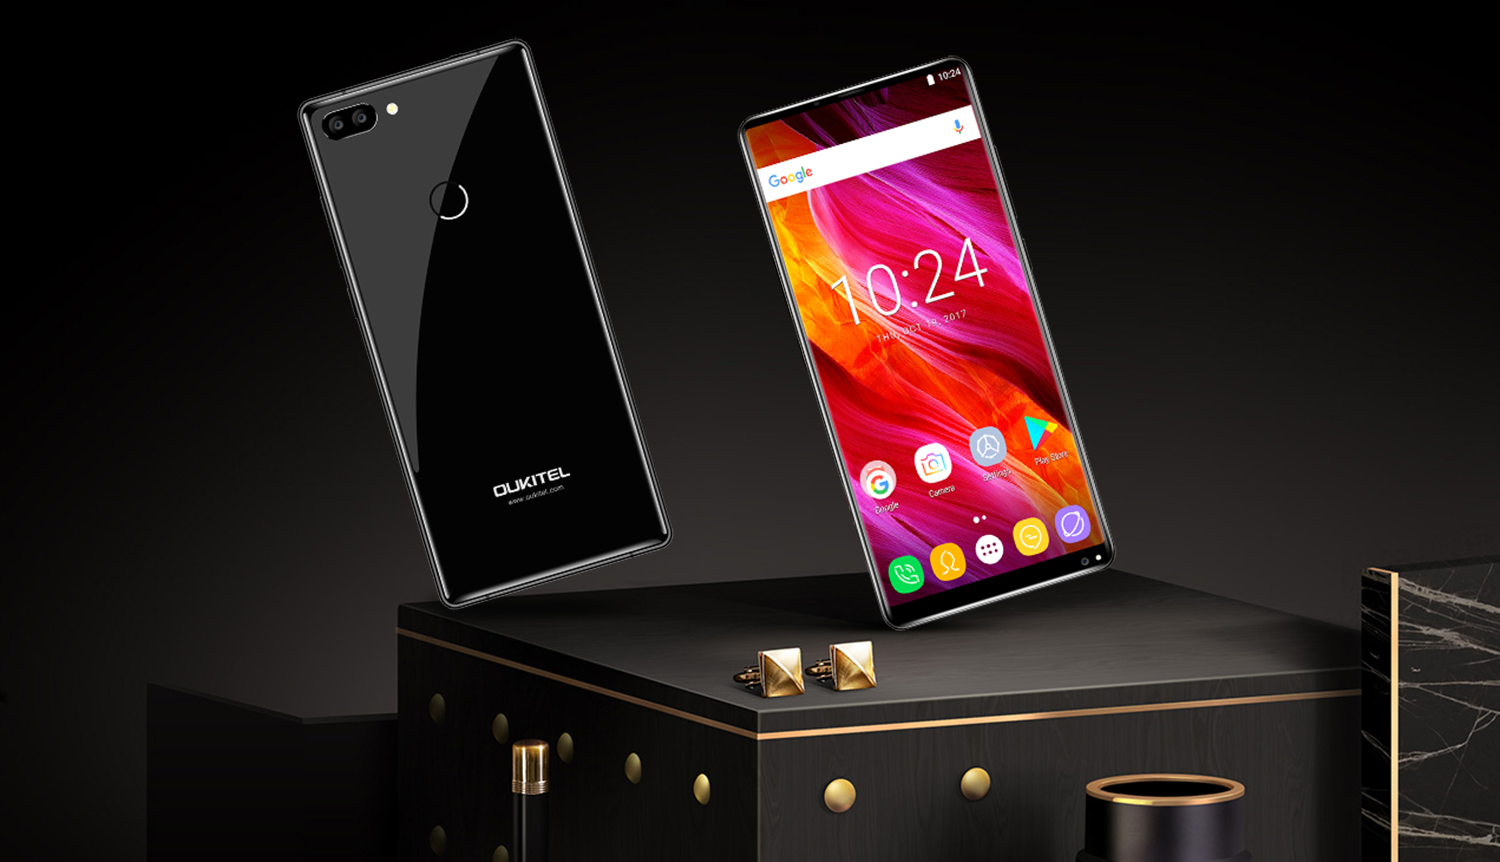 Become one of the first owners OUKITEL MIX 2!